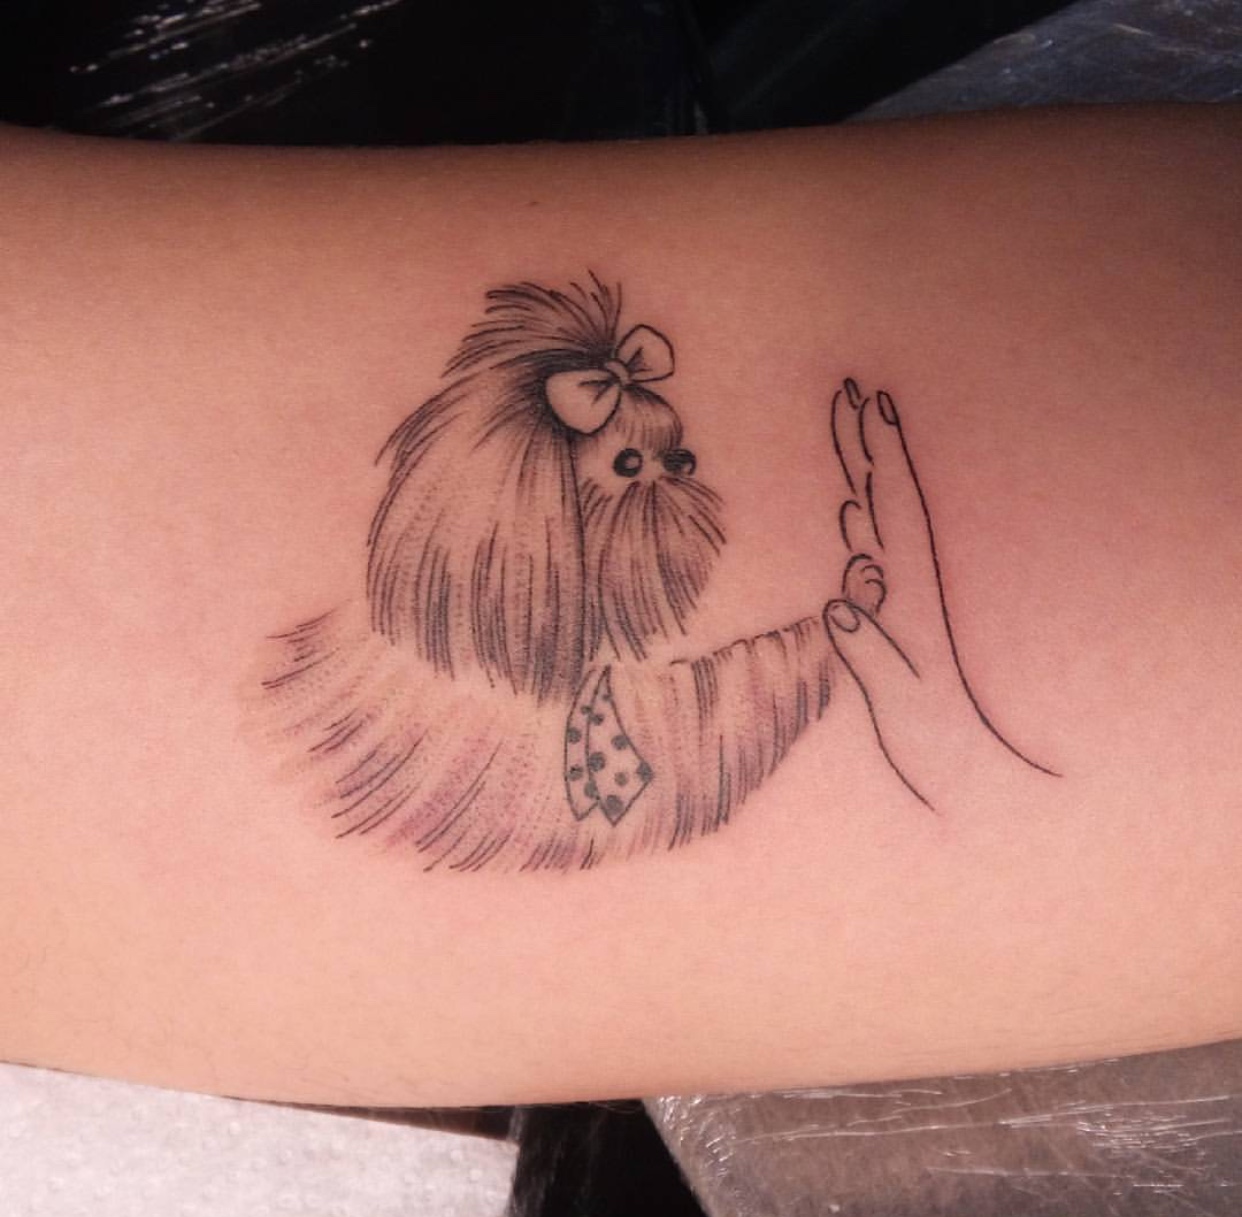 Shih Tzu giving a paw on a hand tattoo